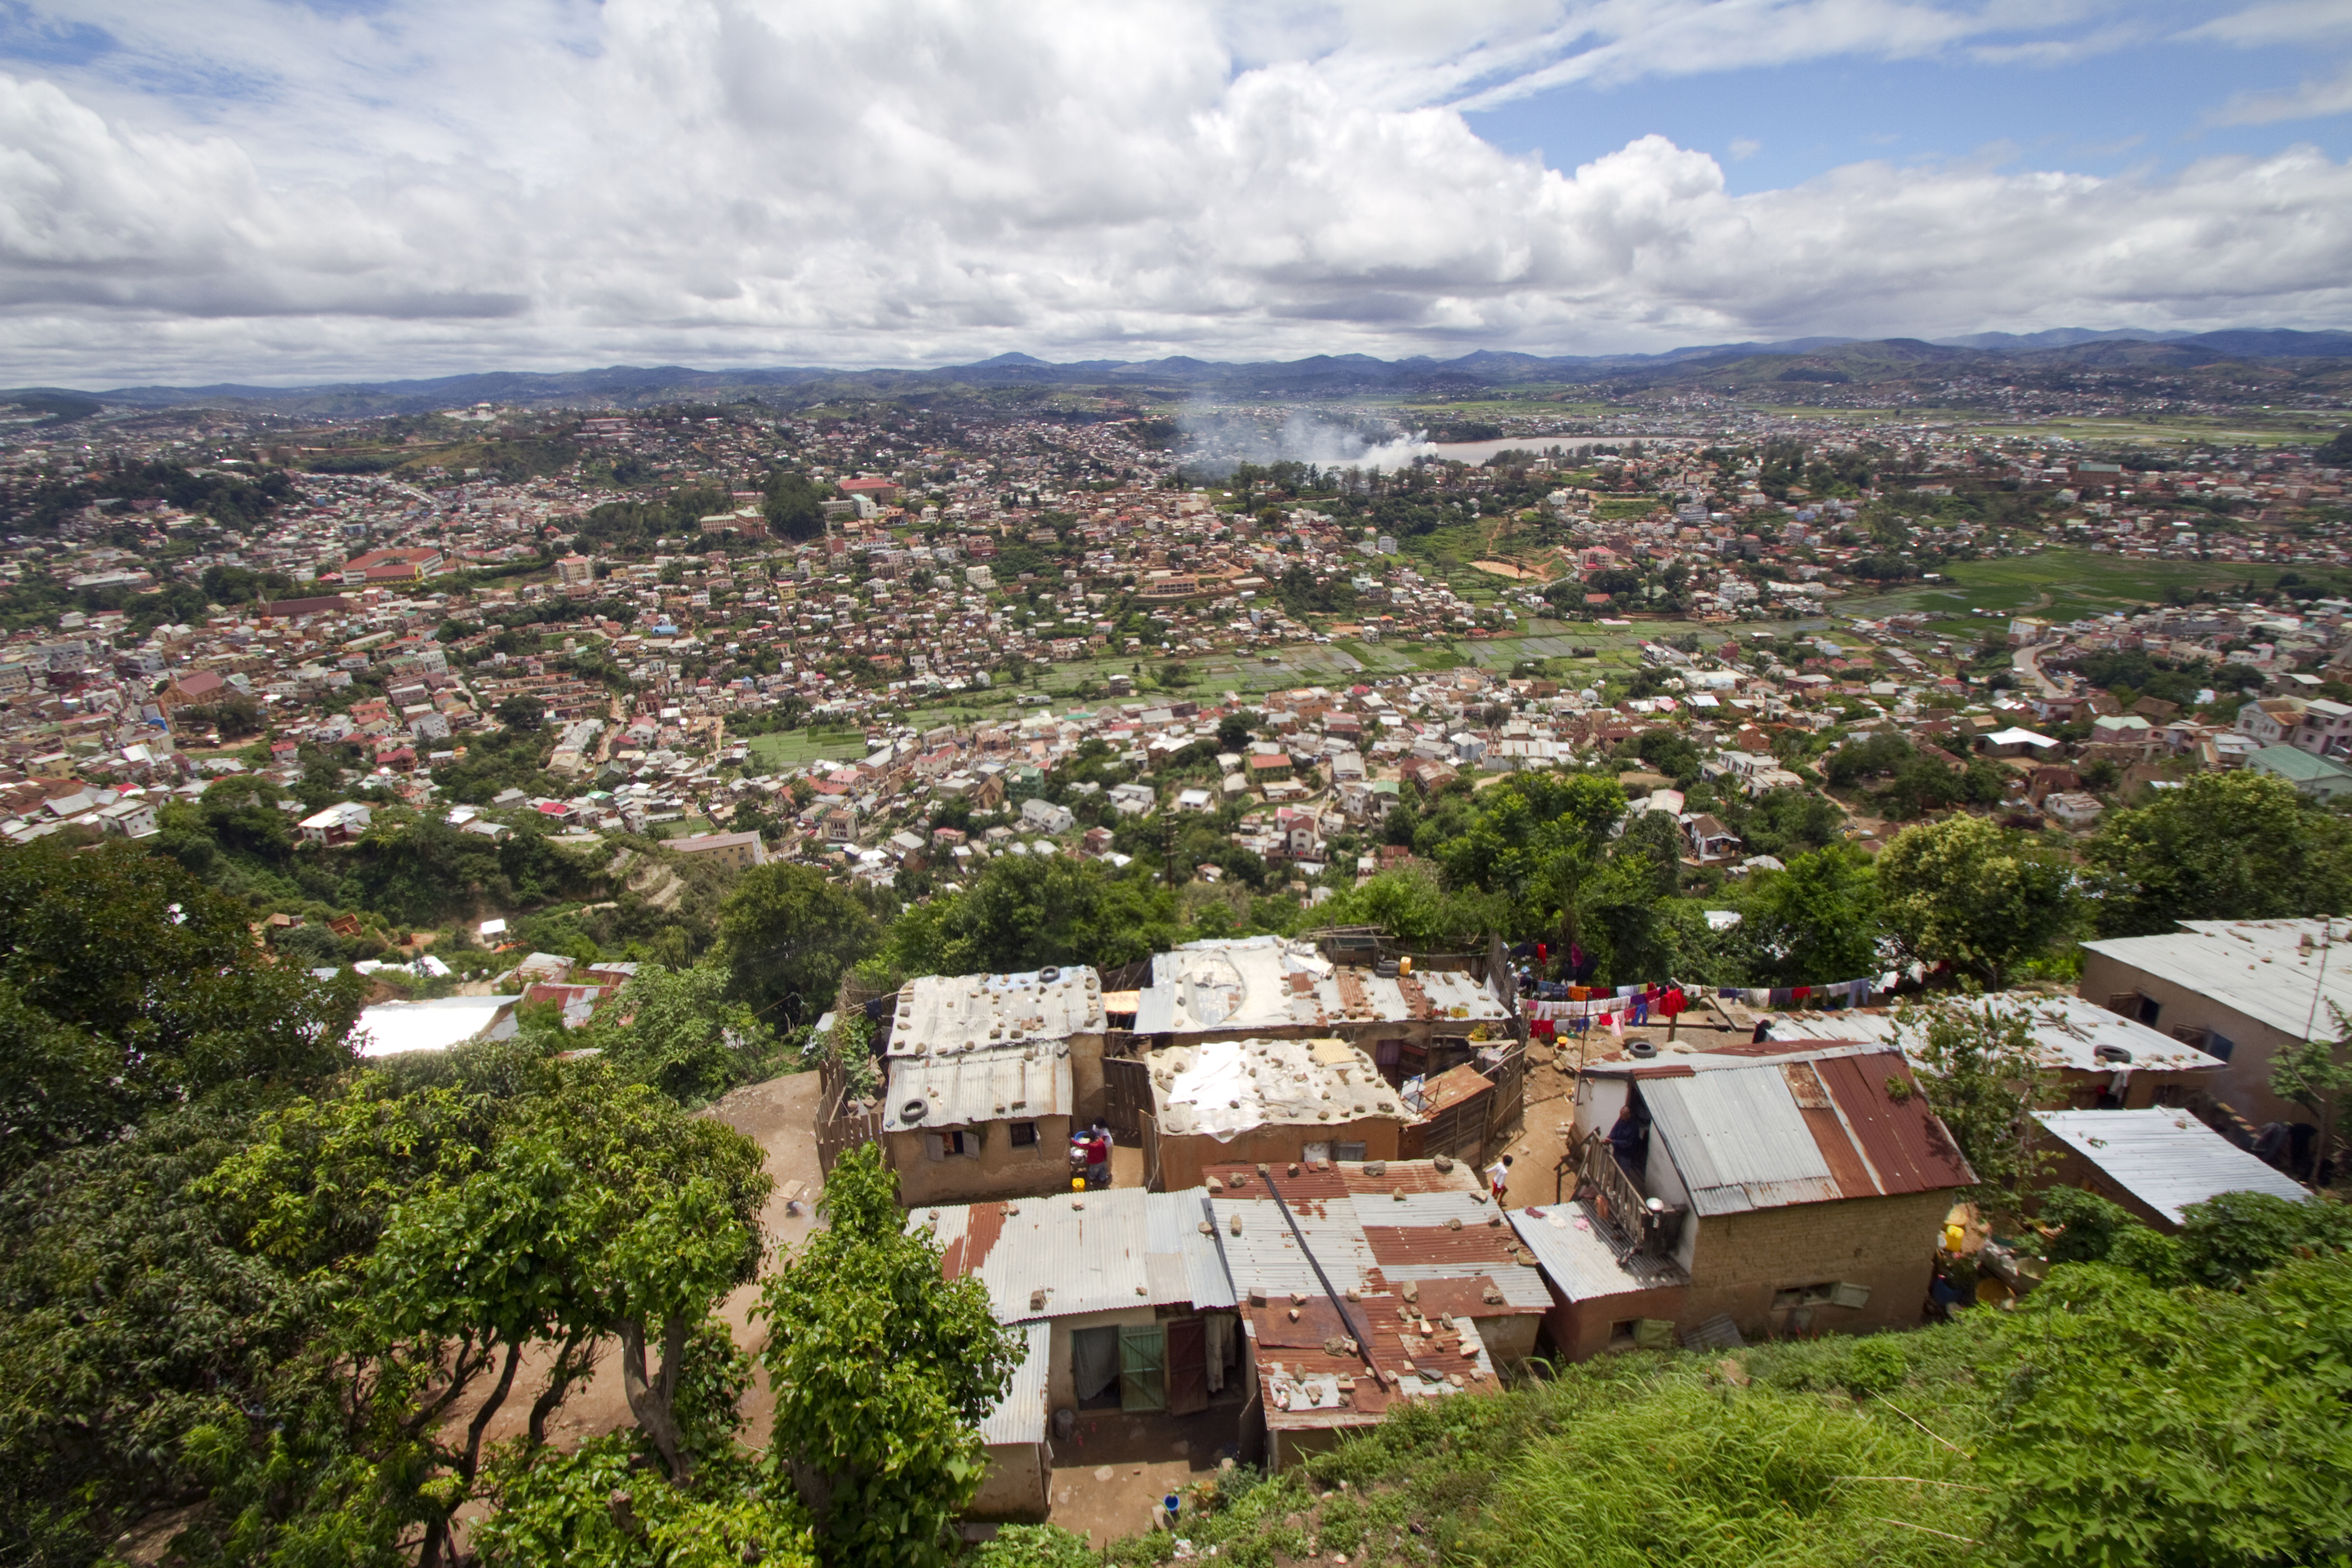 Antananarivo is the capital and largest city in Madagascar. (Photo by Thomas Cox)